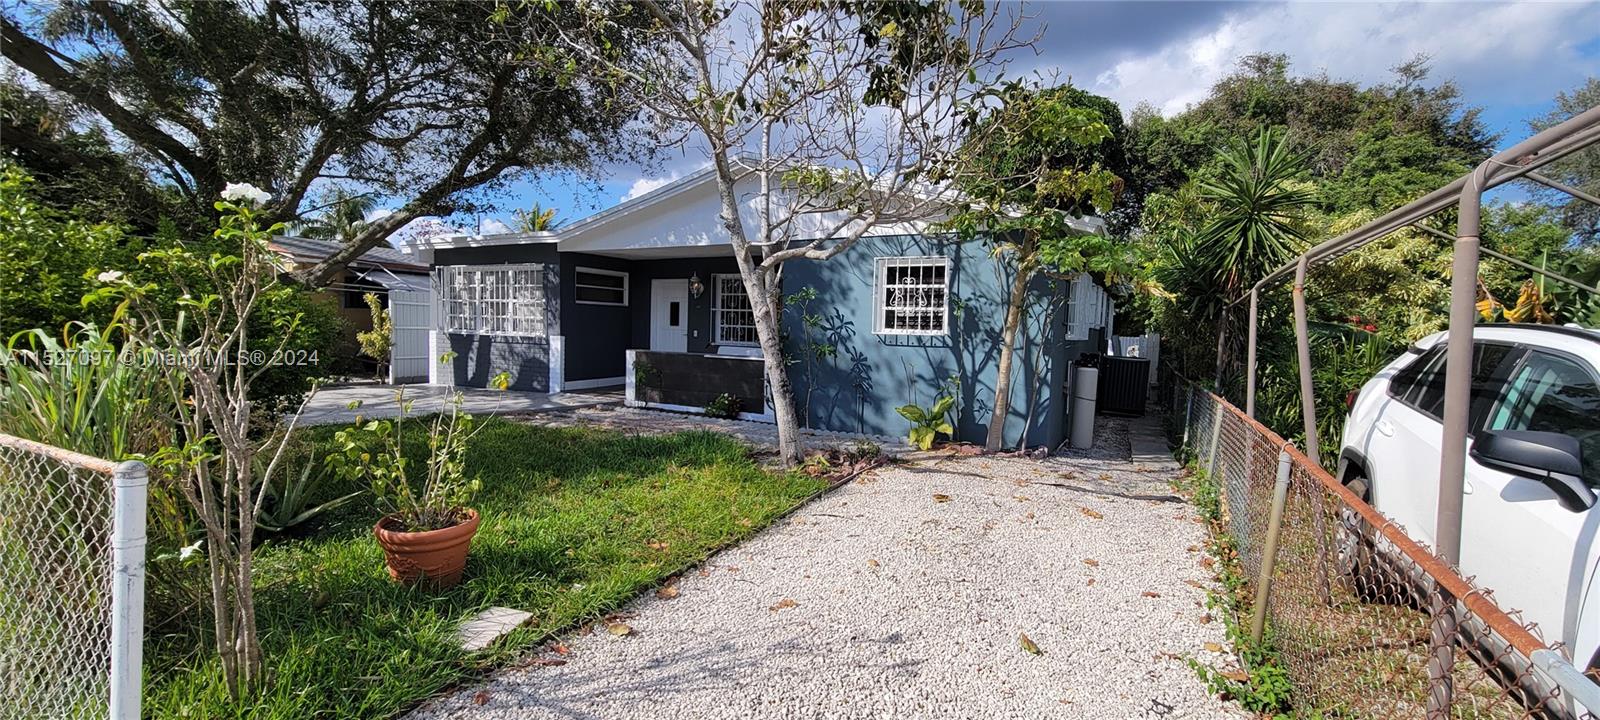 Address Not Disclosed, North Miami Beach, Miami-Dade County, Florida - 2 Bedrooms  
2 Bathrooms - 